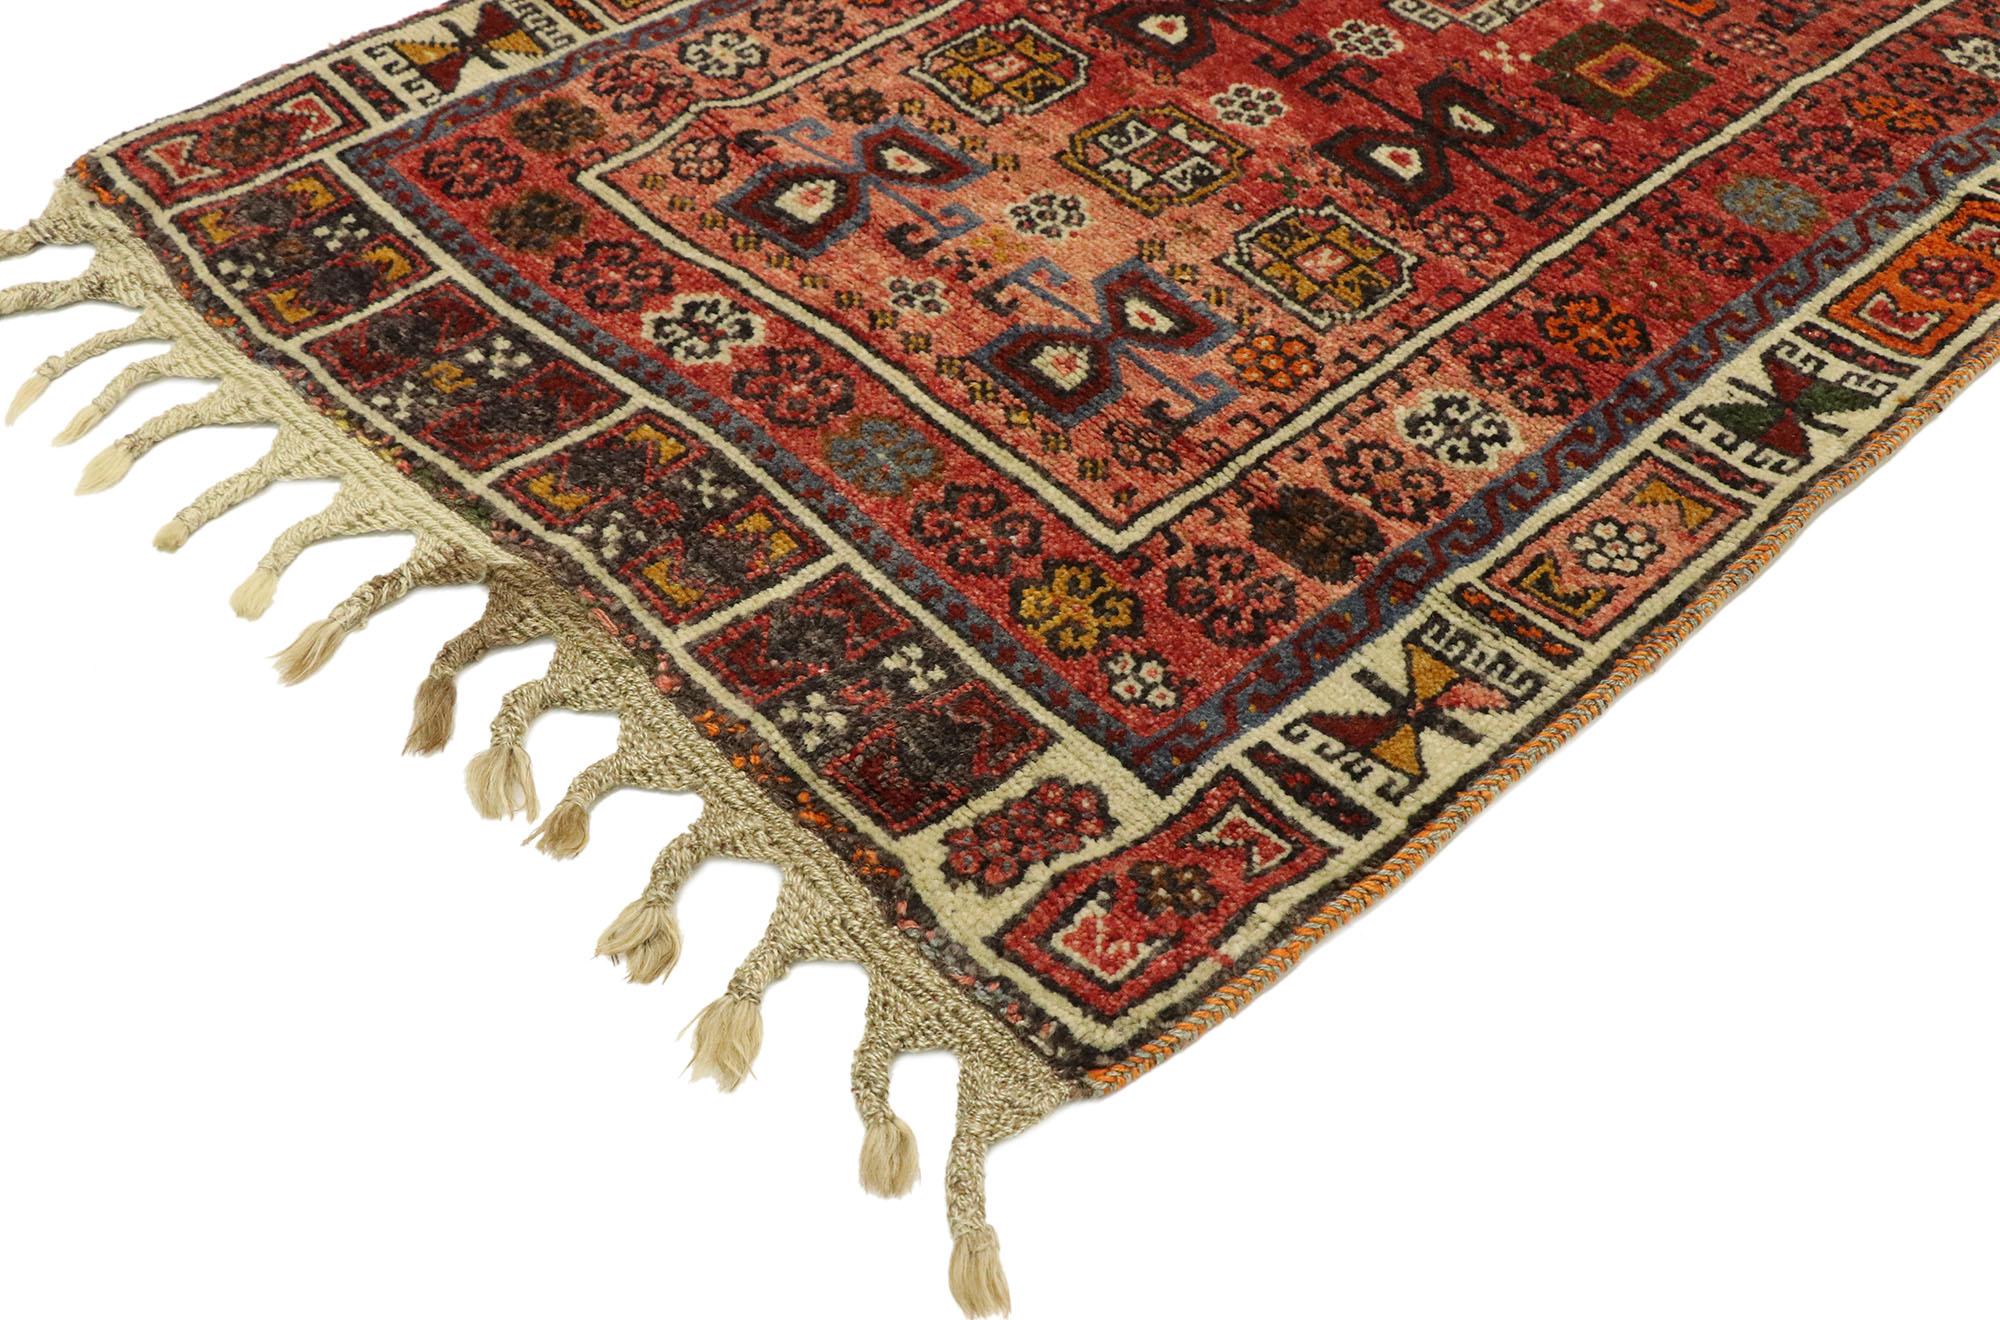 53038, vintage Turkish Oushak Prayer rug with Tribal Folk Art Charm. With its luminous warm hues and beguiling beauty, this hand knotted wool vintage Turkish Oushak prayer rug is immersed in Anatolian history. It features a hooked mihrab niche